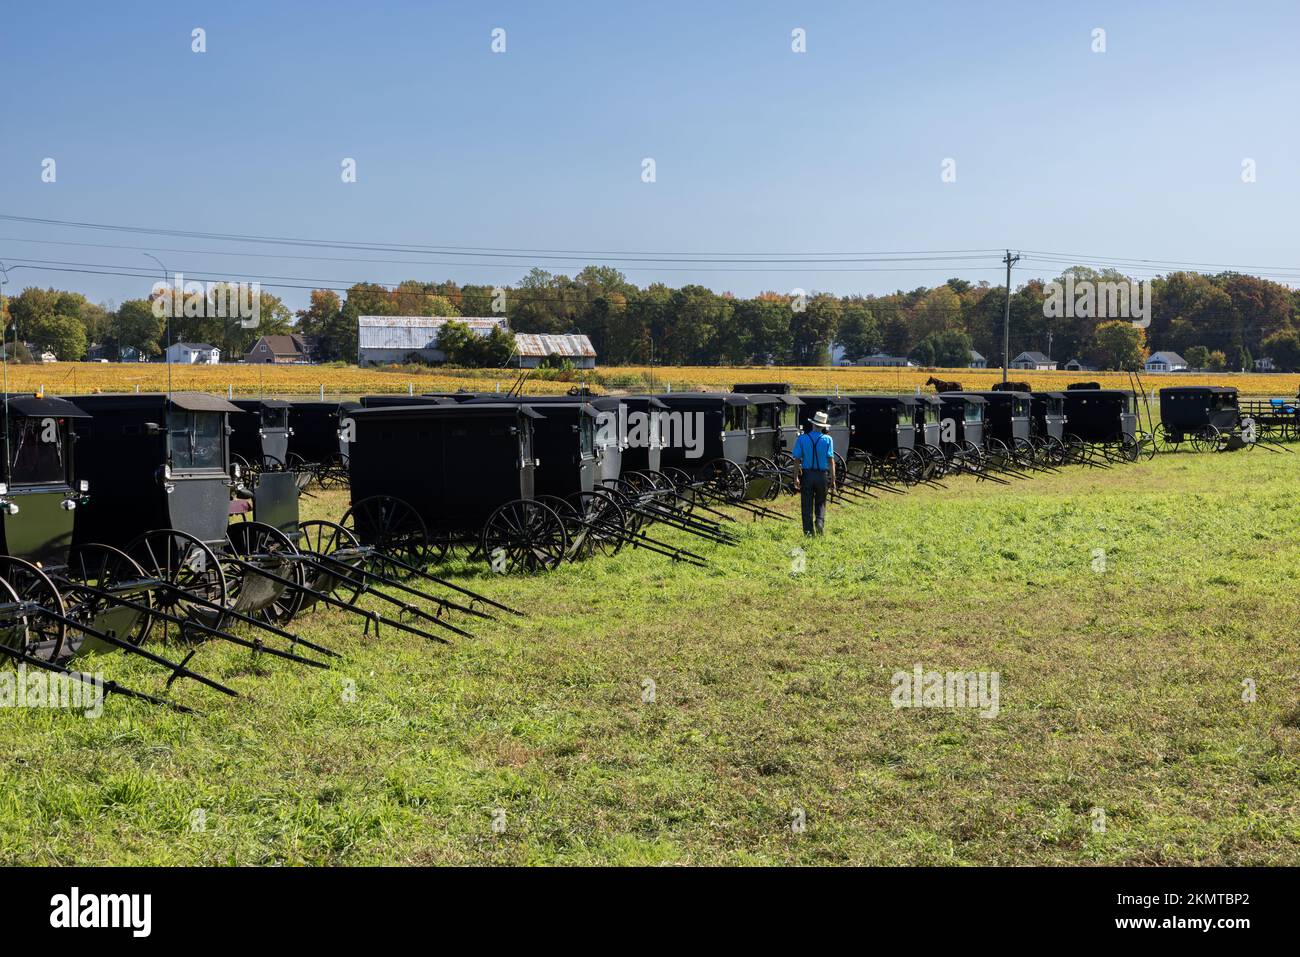 Buggies lined up in a grassy field at an auction in Casson Corner, Kent County, Delaware Stock Photo